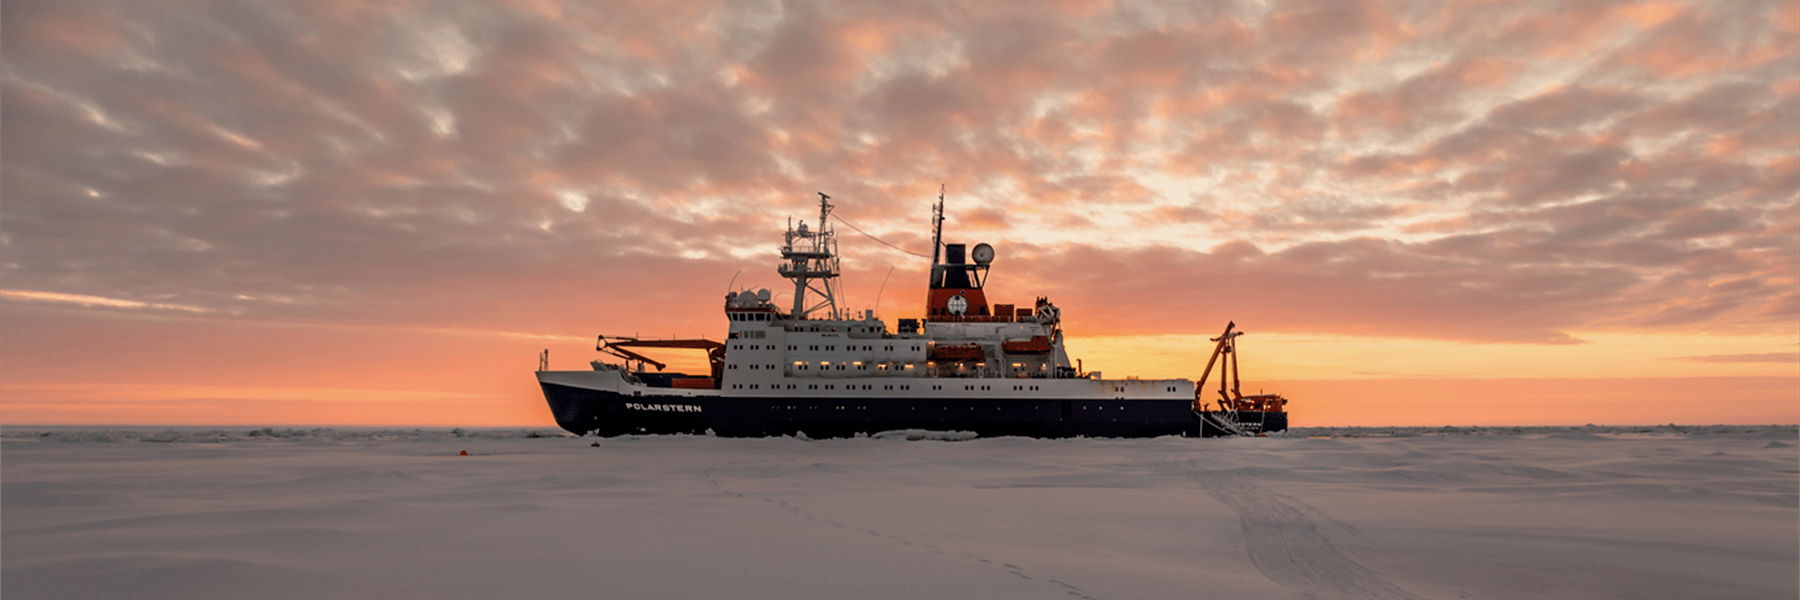 The German Icebreaker RV Polarstern Is Surrounded By Pack Ice in this 2012 Photograph. Credit: Alfred Wegener Institute